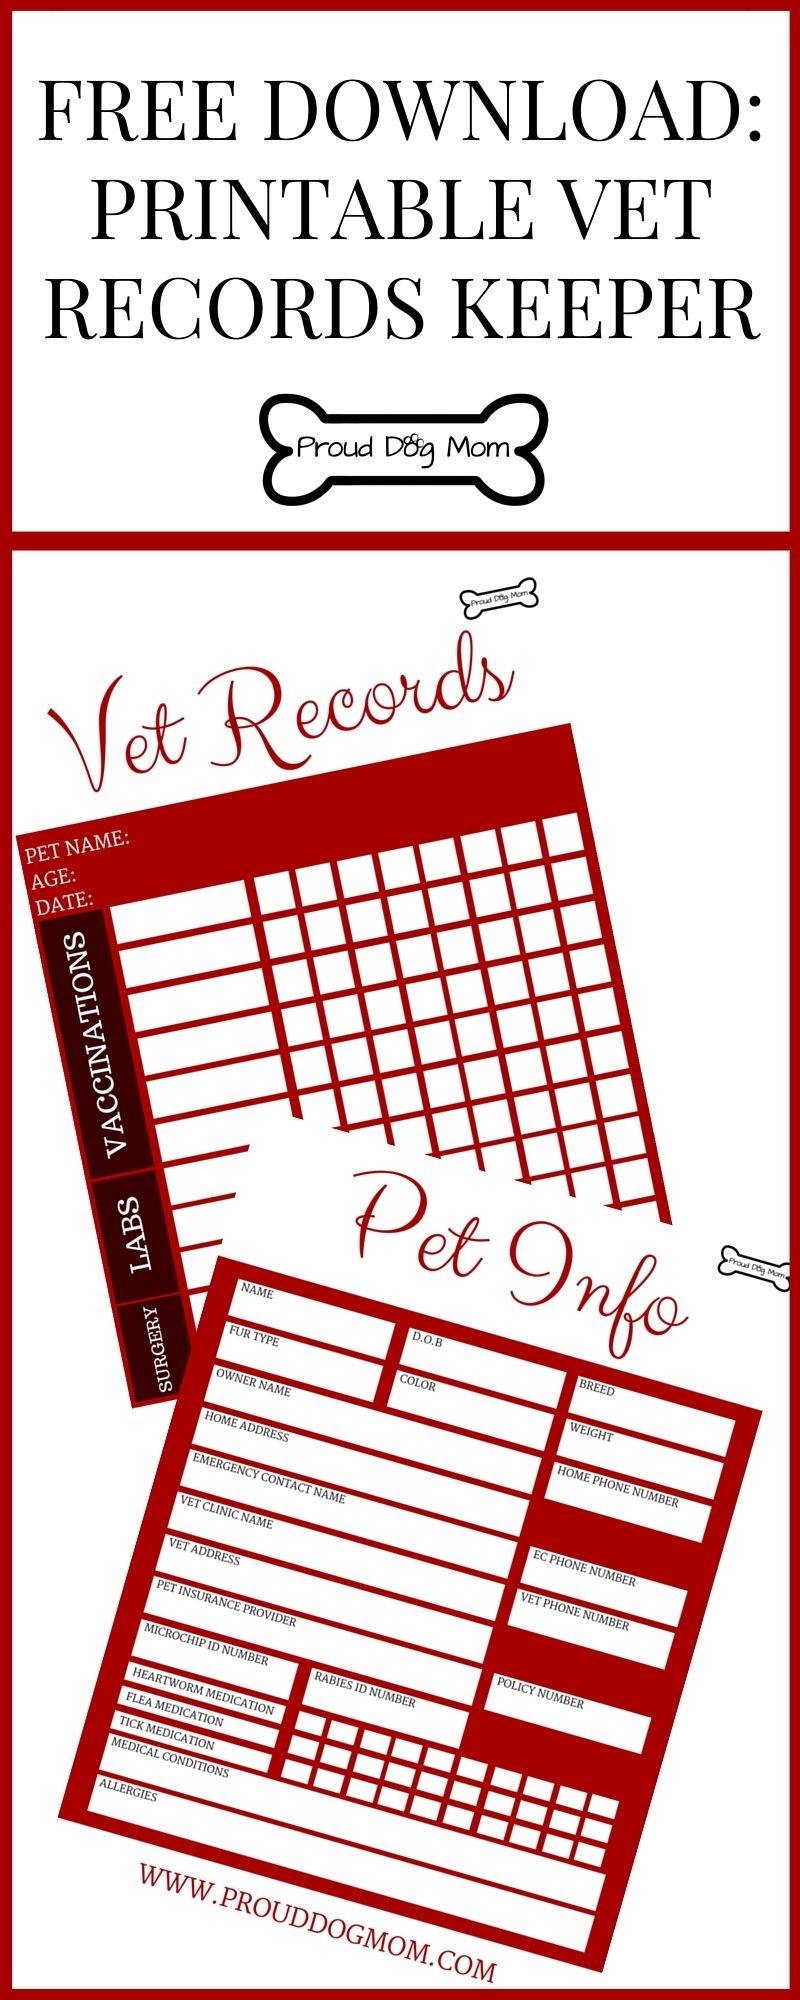 Free Download: Printable Vet Records Keeper | Pets | Puppies, Dog - Free Printable Dog Shot Records